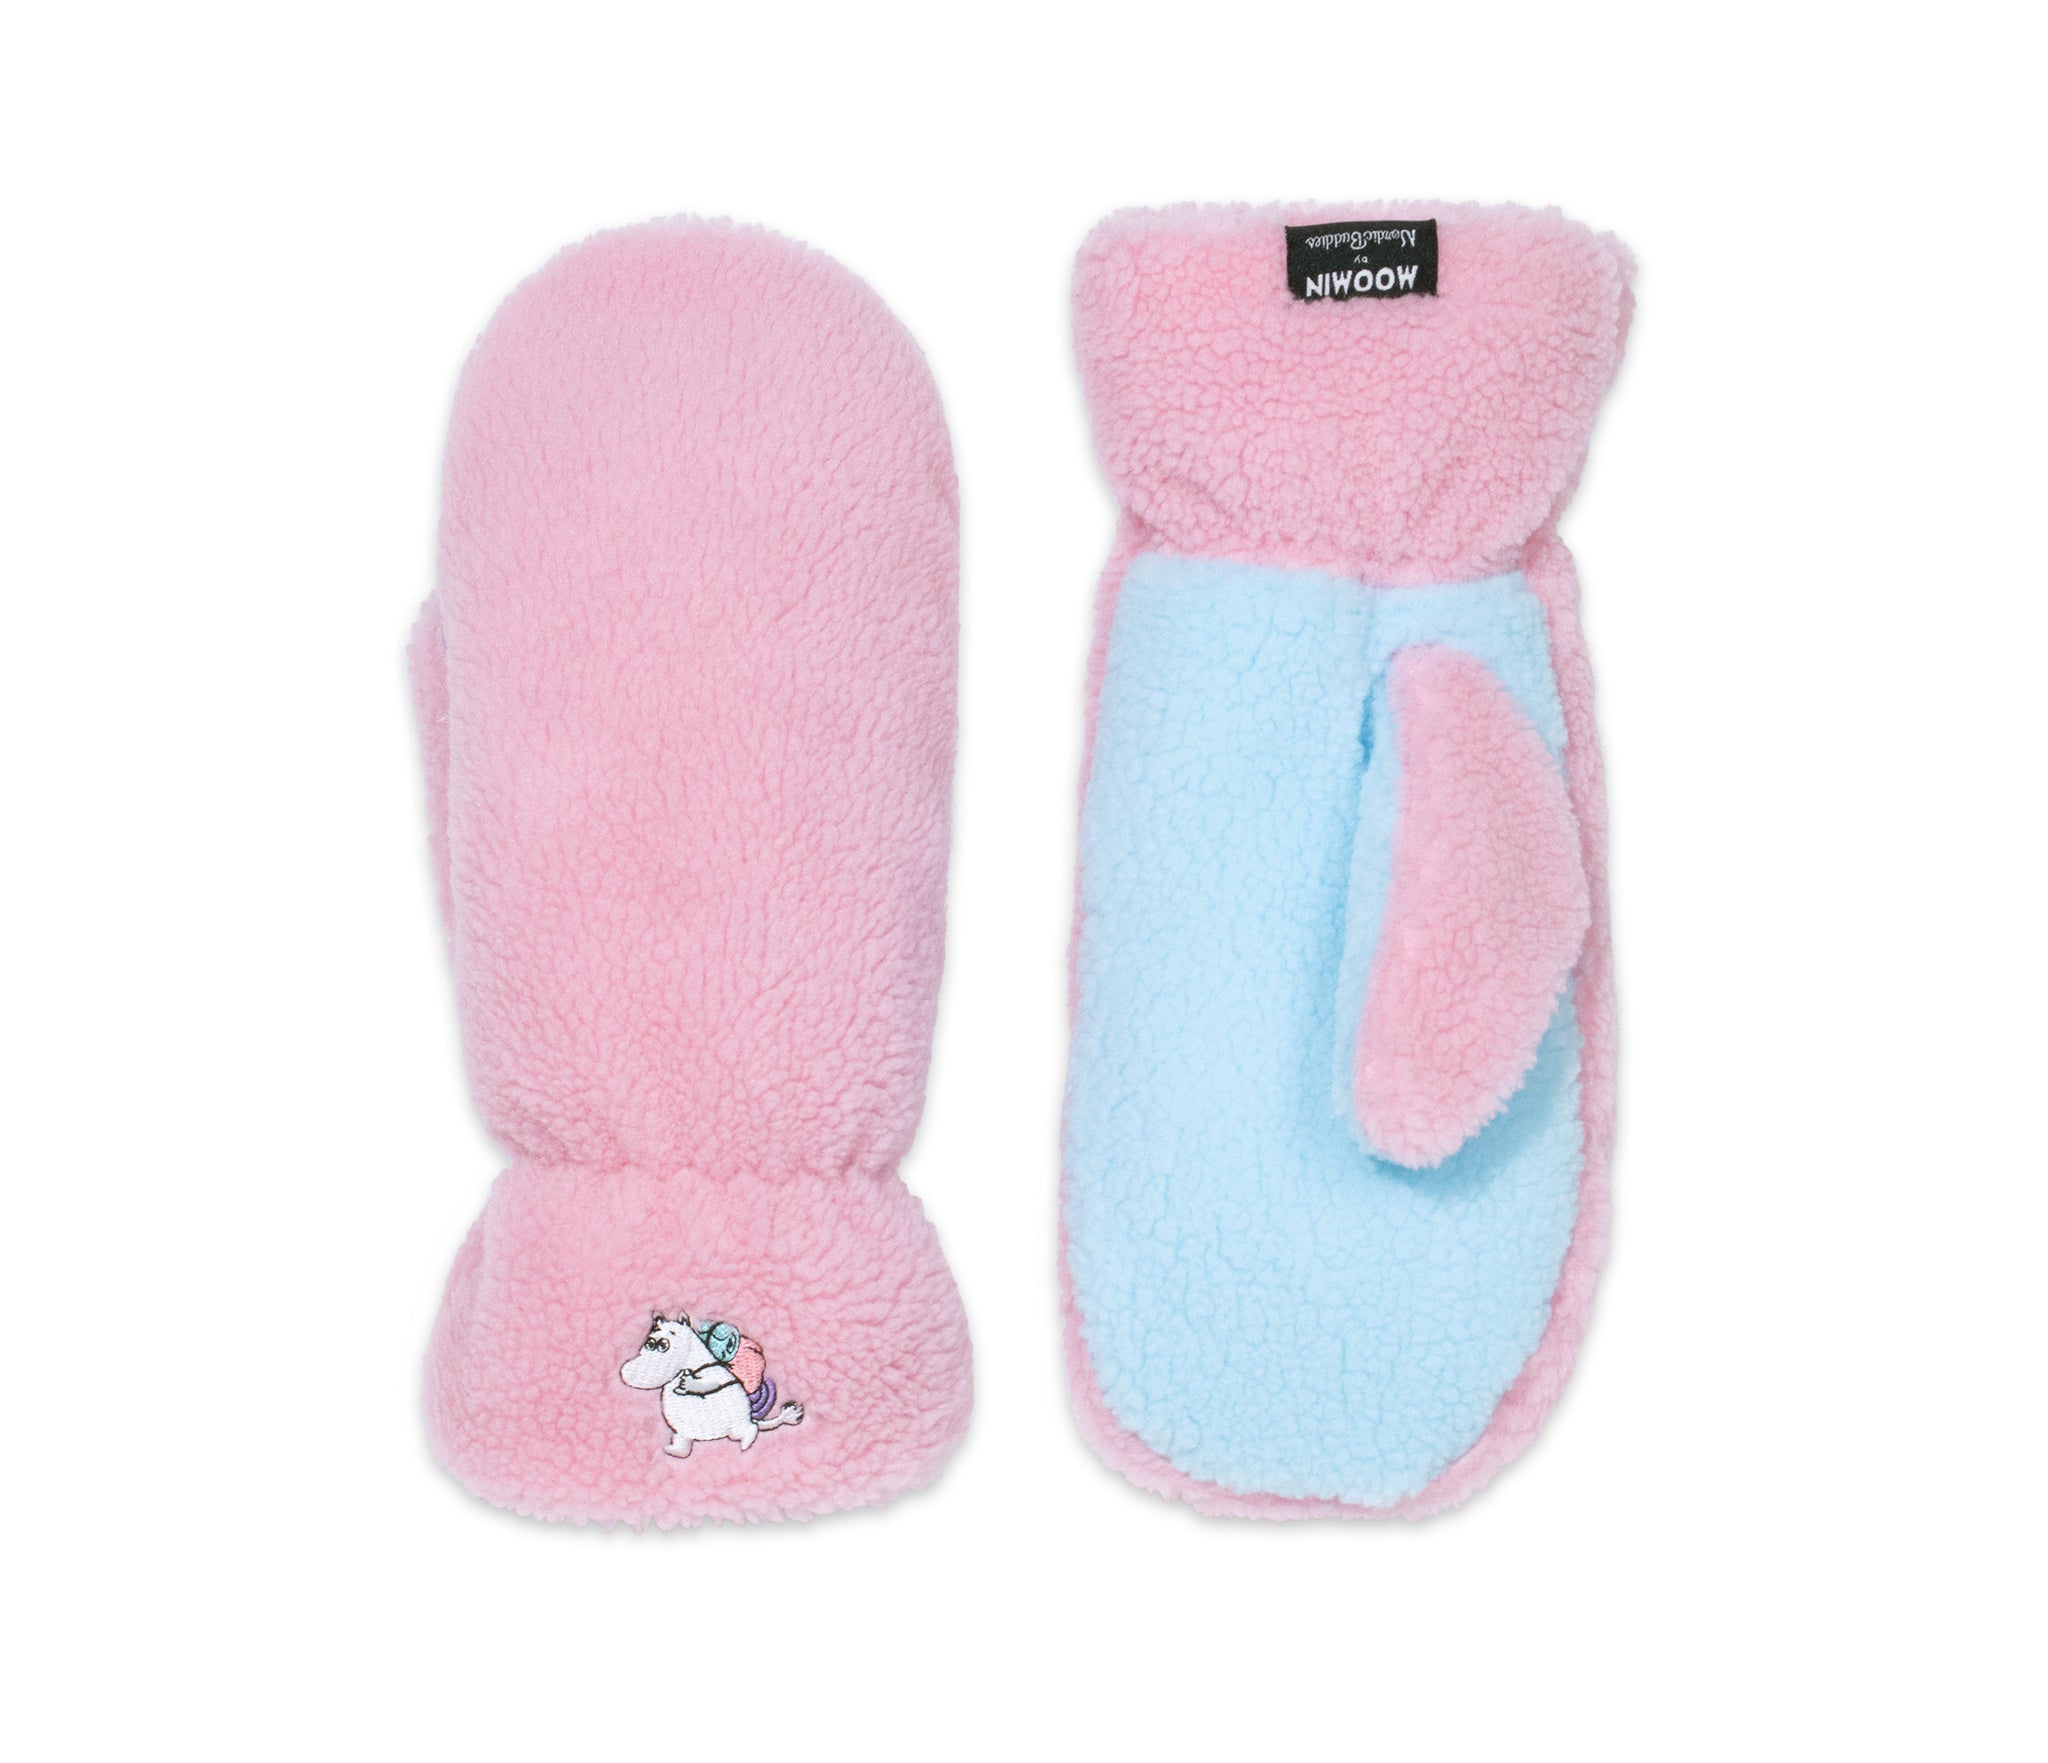 Moomintroll Fluffy Mittens Adult - Pink